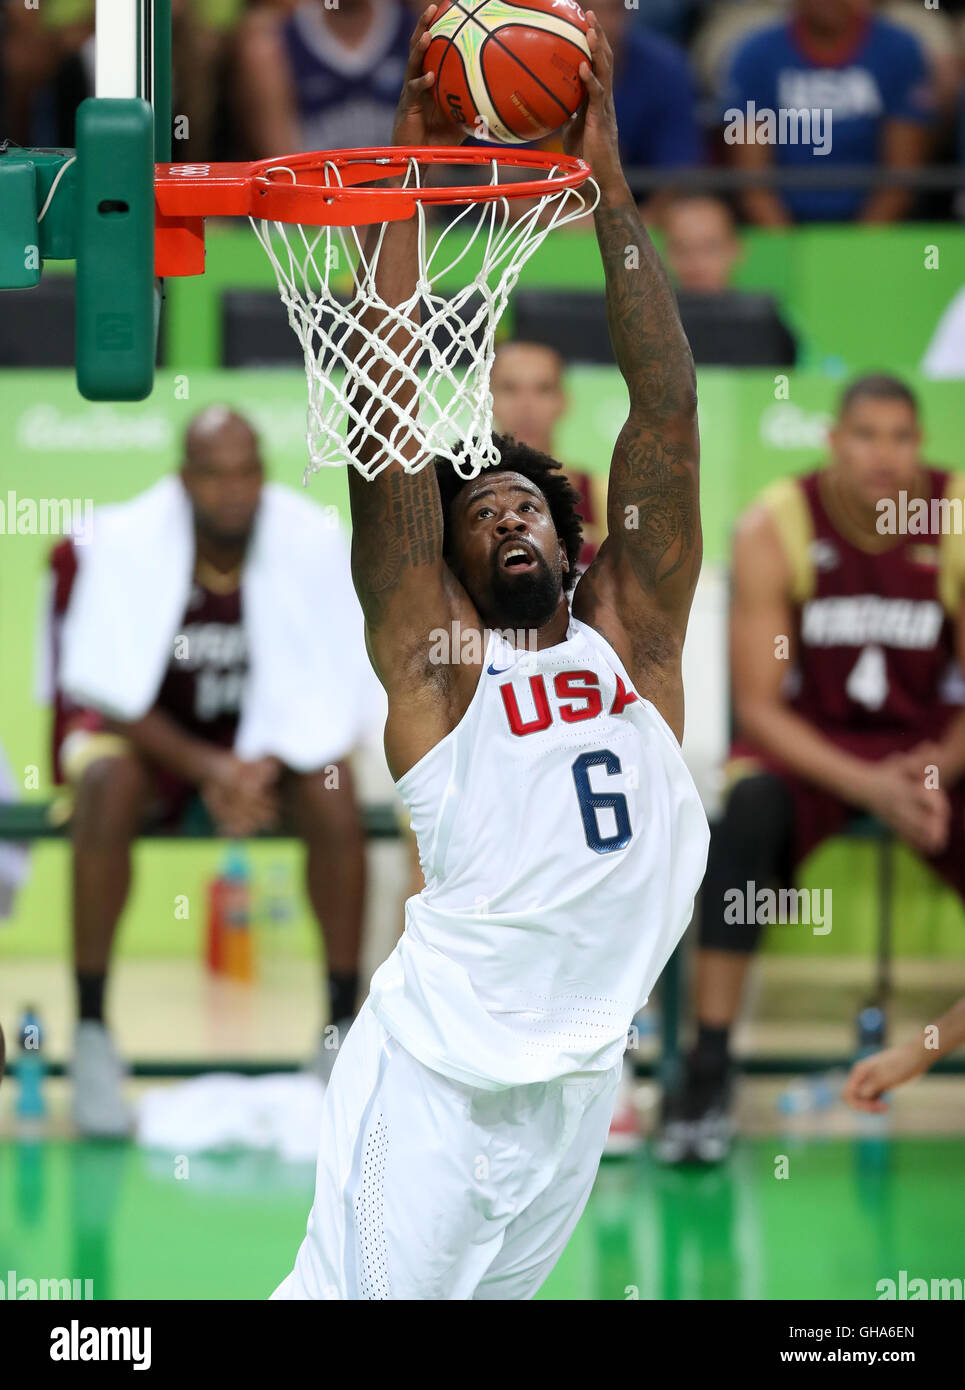 USA's DeAndre Jordan scores a slam dunk during the preliminary round match  at the Carioca Arena 1, on the third day of the Rio Olympic Games, Brazil  Stock Photo - Alamy